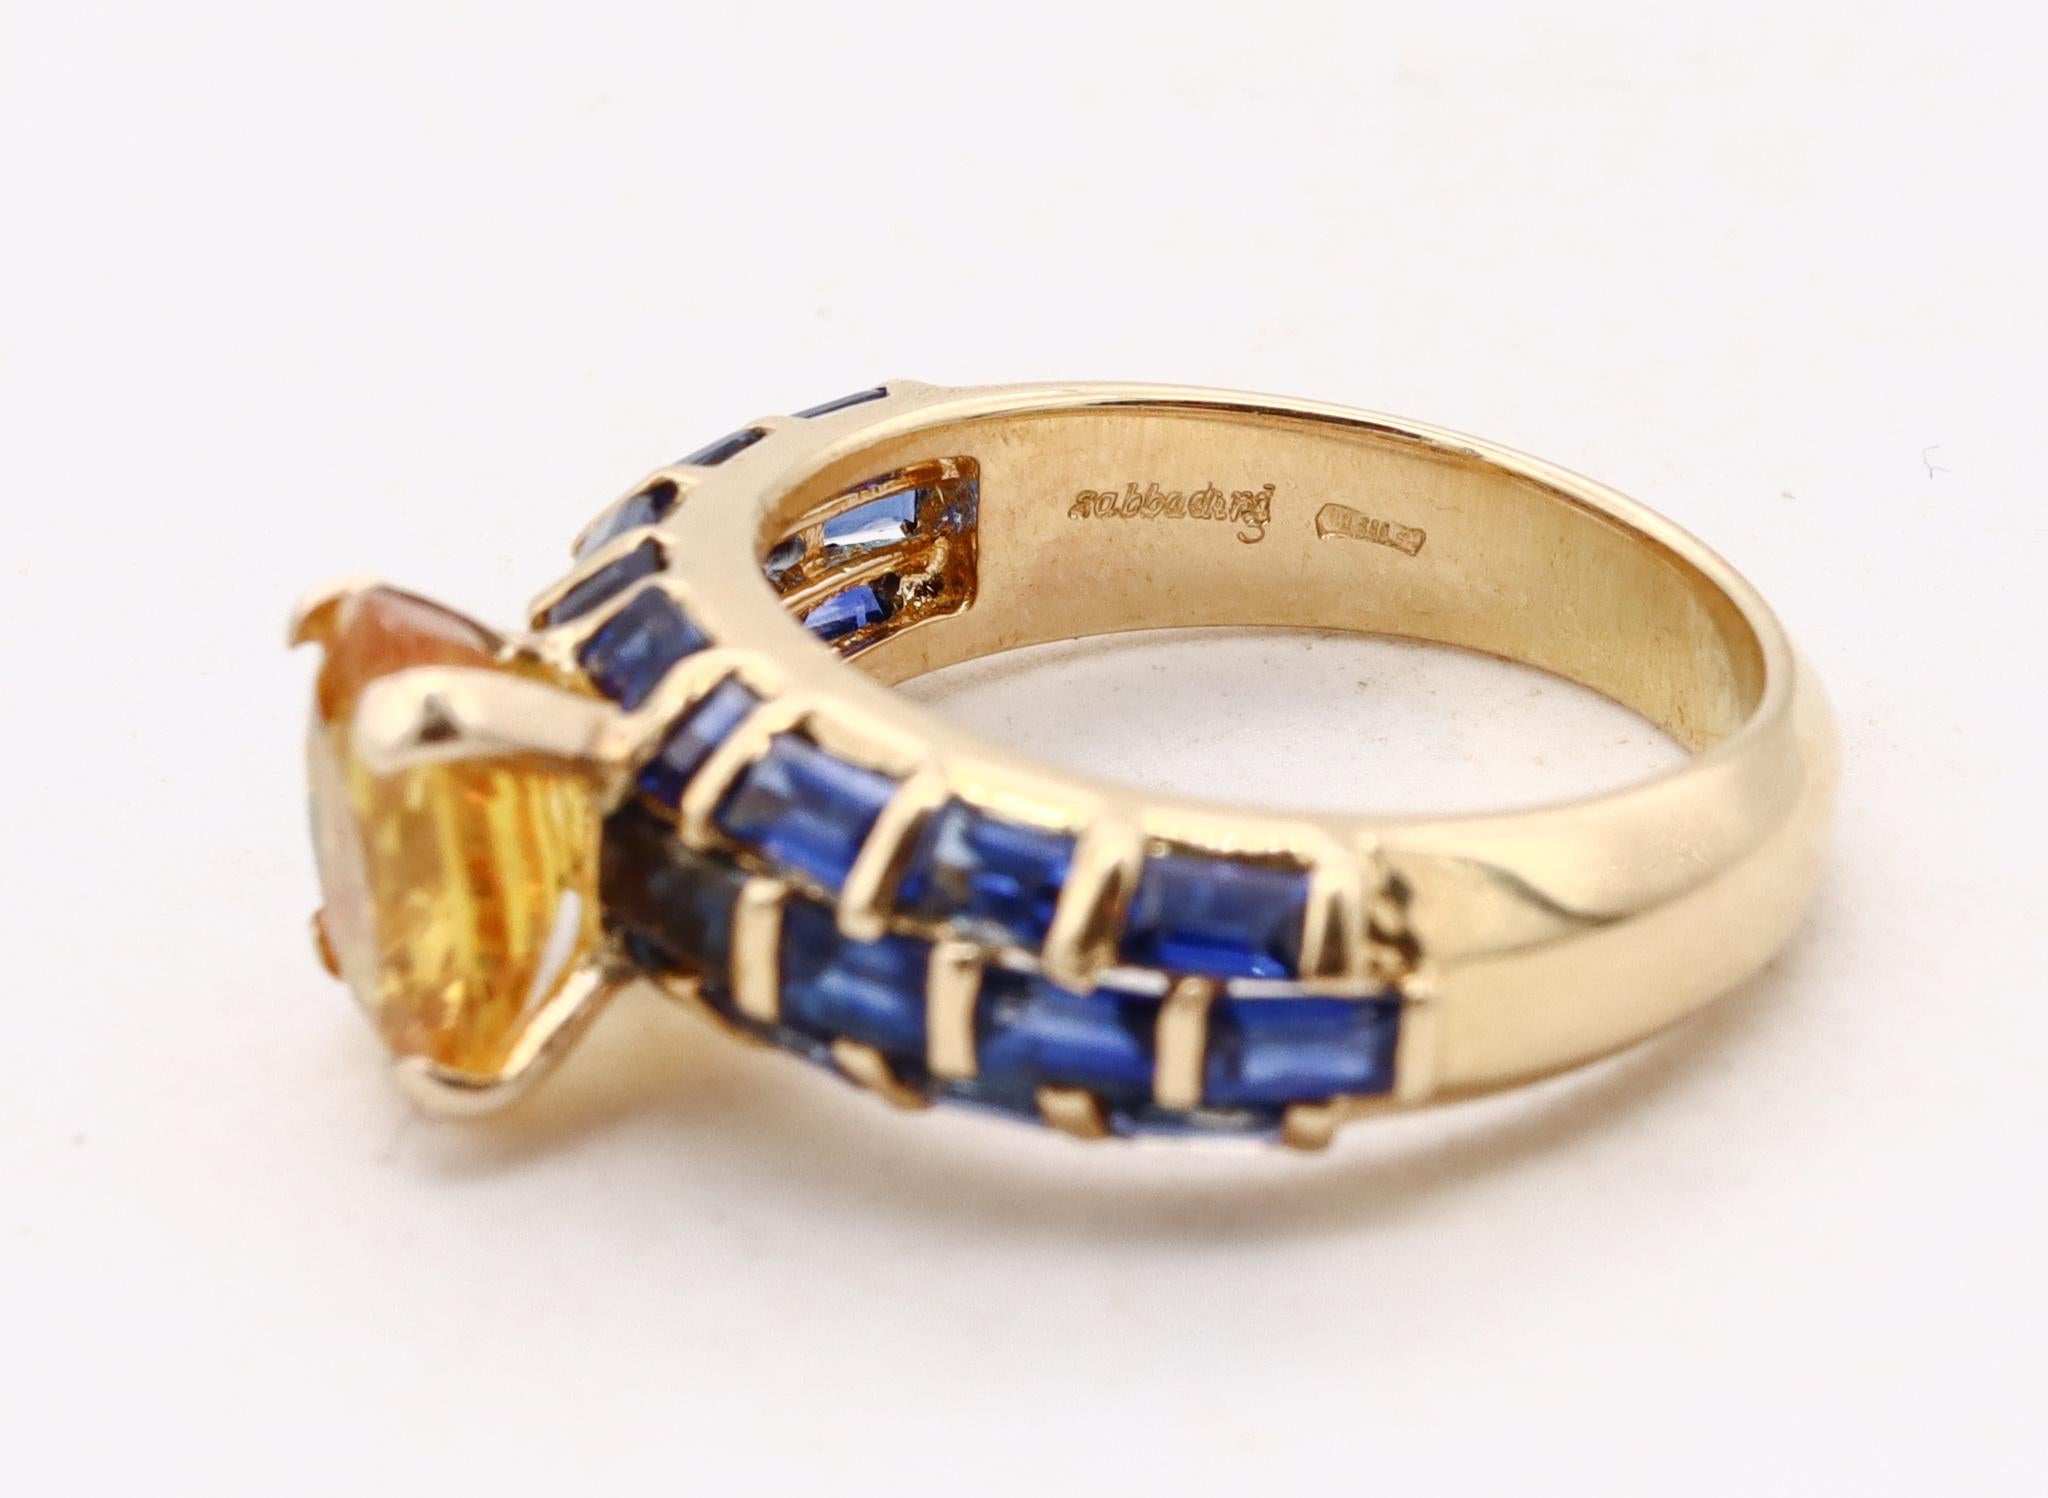 Modern Sabbadini Milano Jeweled Ring 18kt Gold with 4.49 Cts Blue and Yellow Sapphires